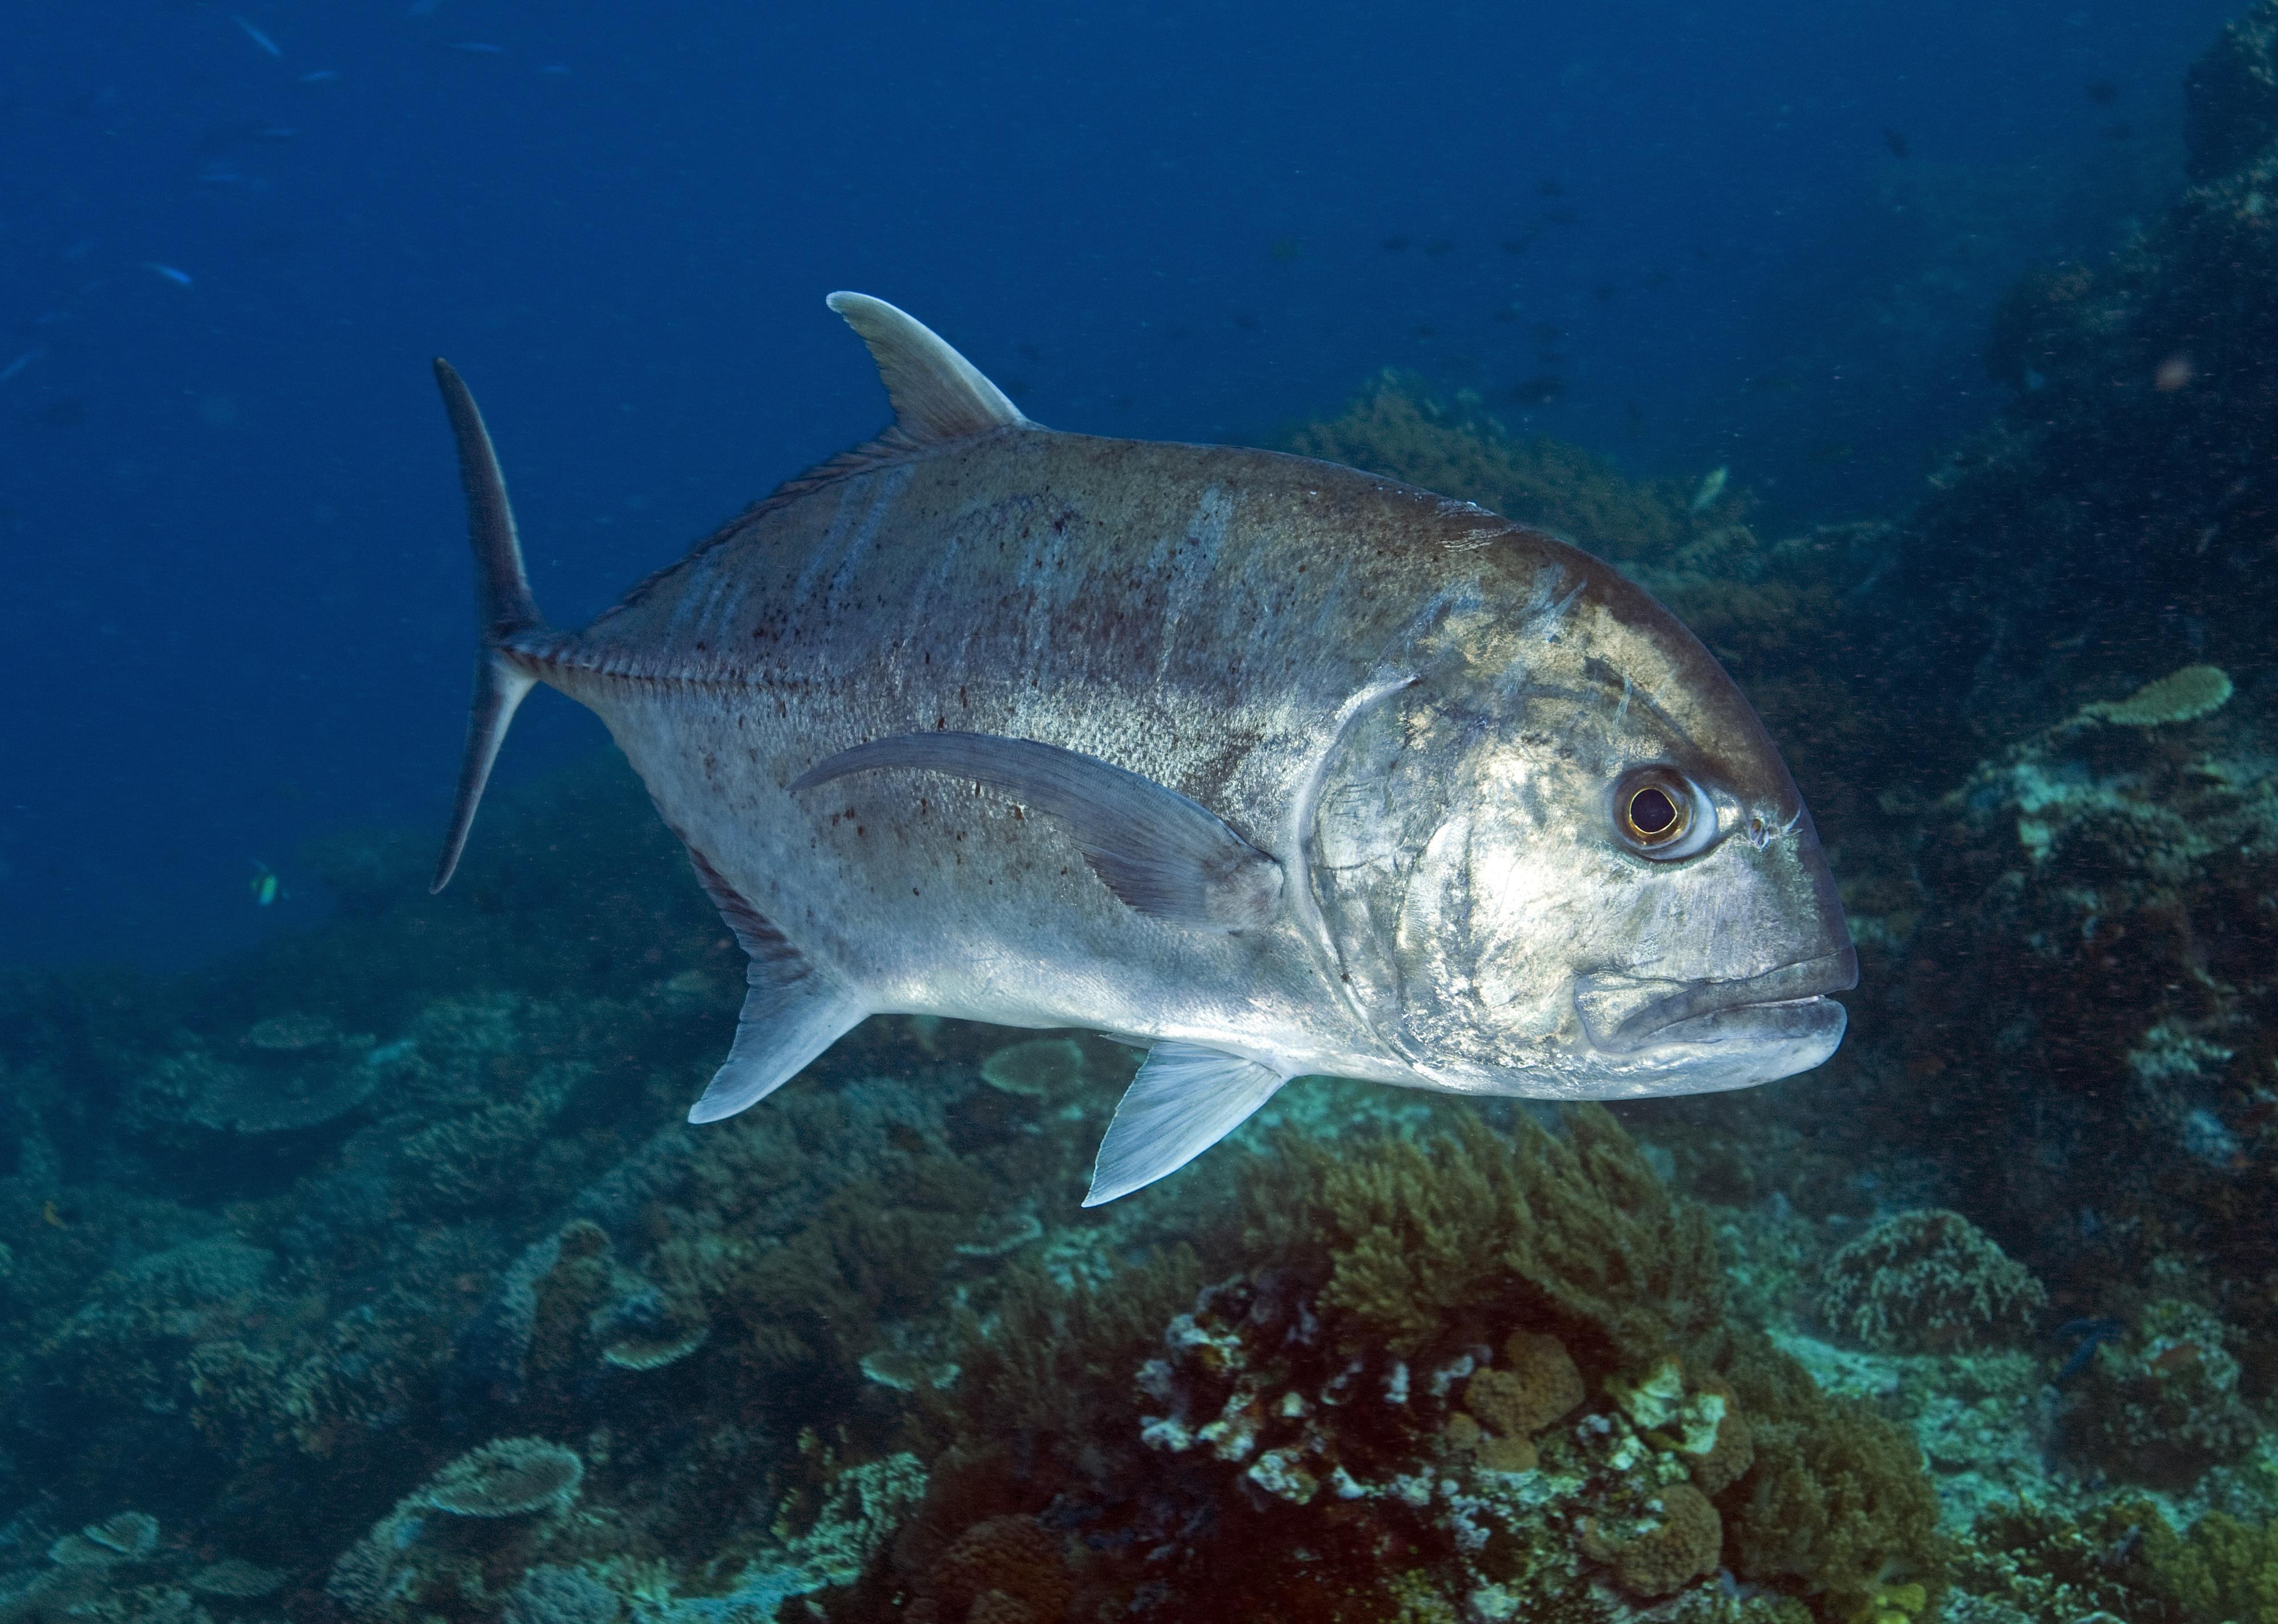 Giant trevally swimming in water.